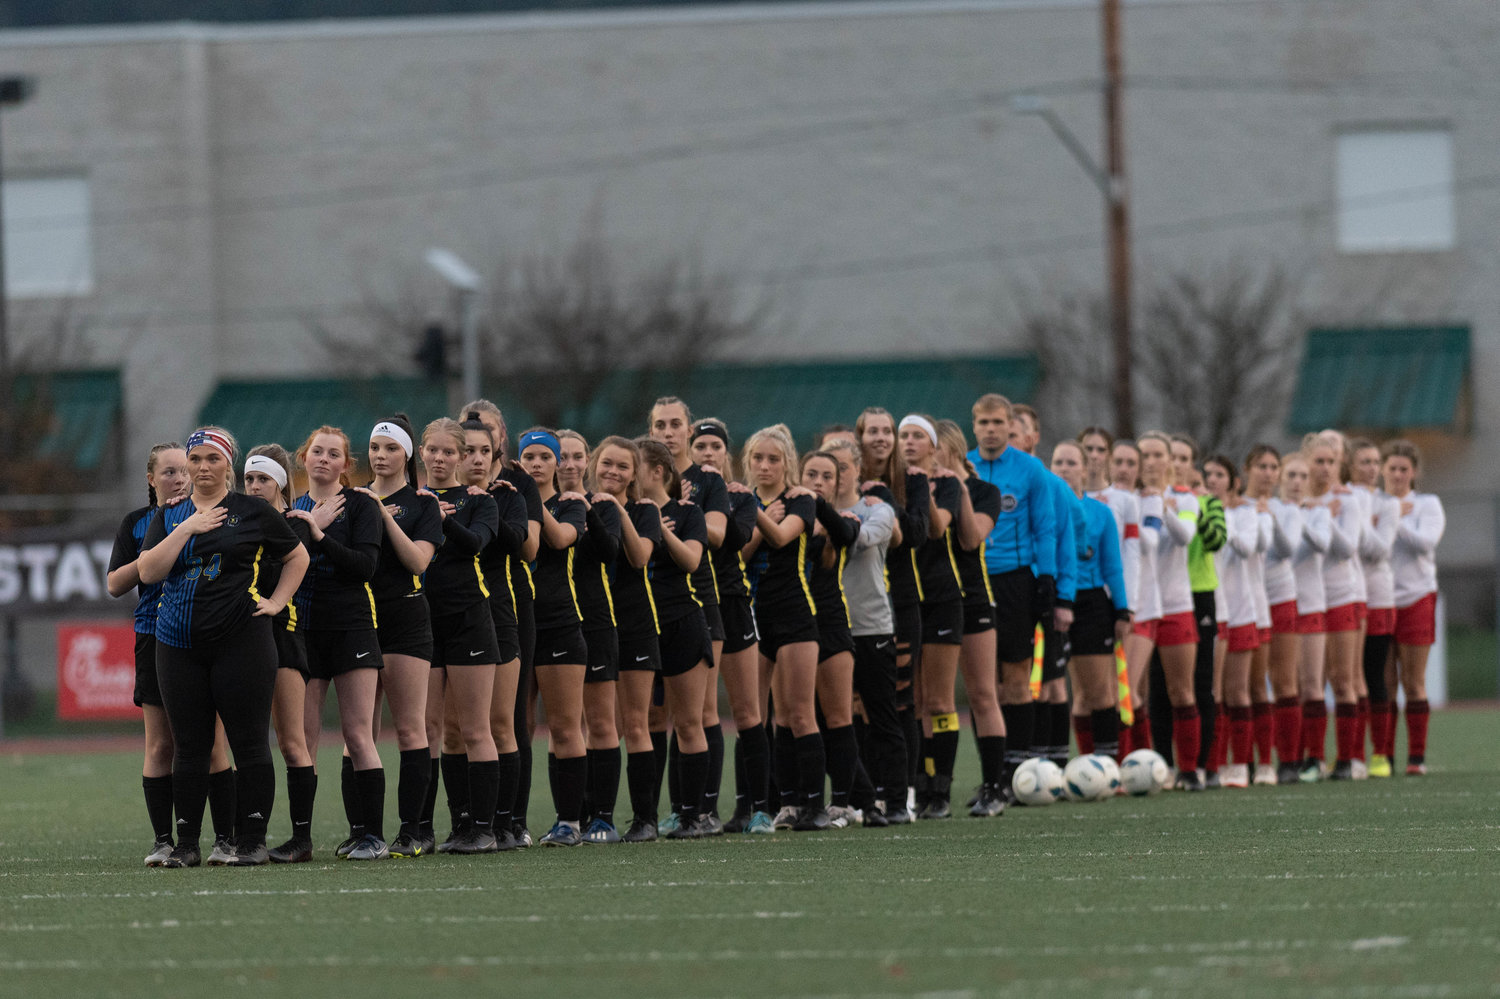 The Adna and Toledo girls soccer teams face the flag for the national anthem in the 2B state semifinals Nov. 19.